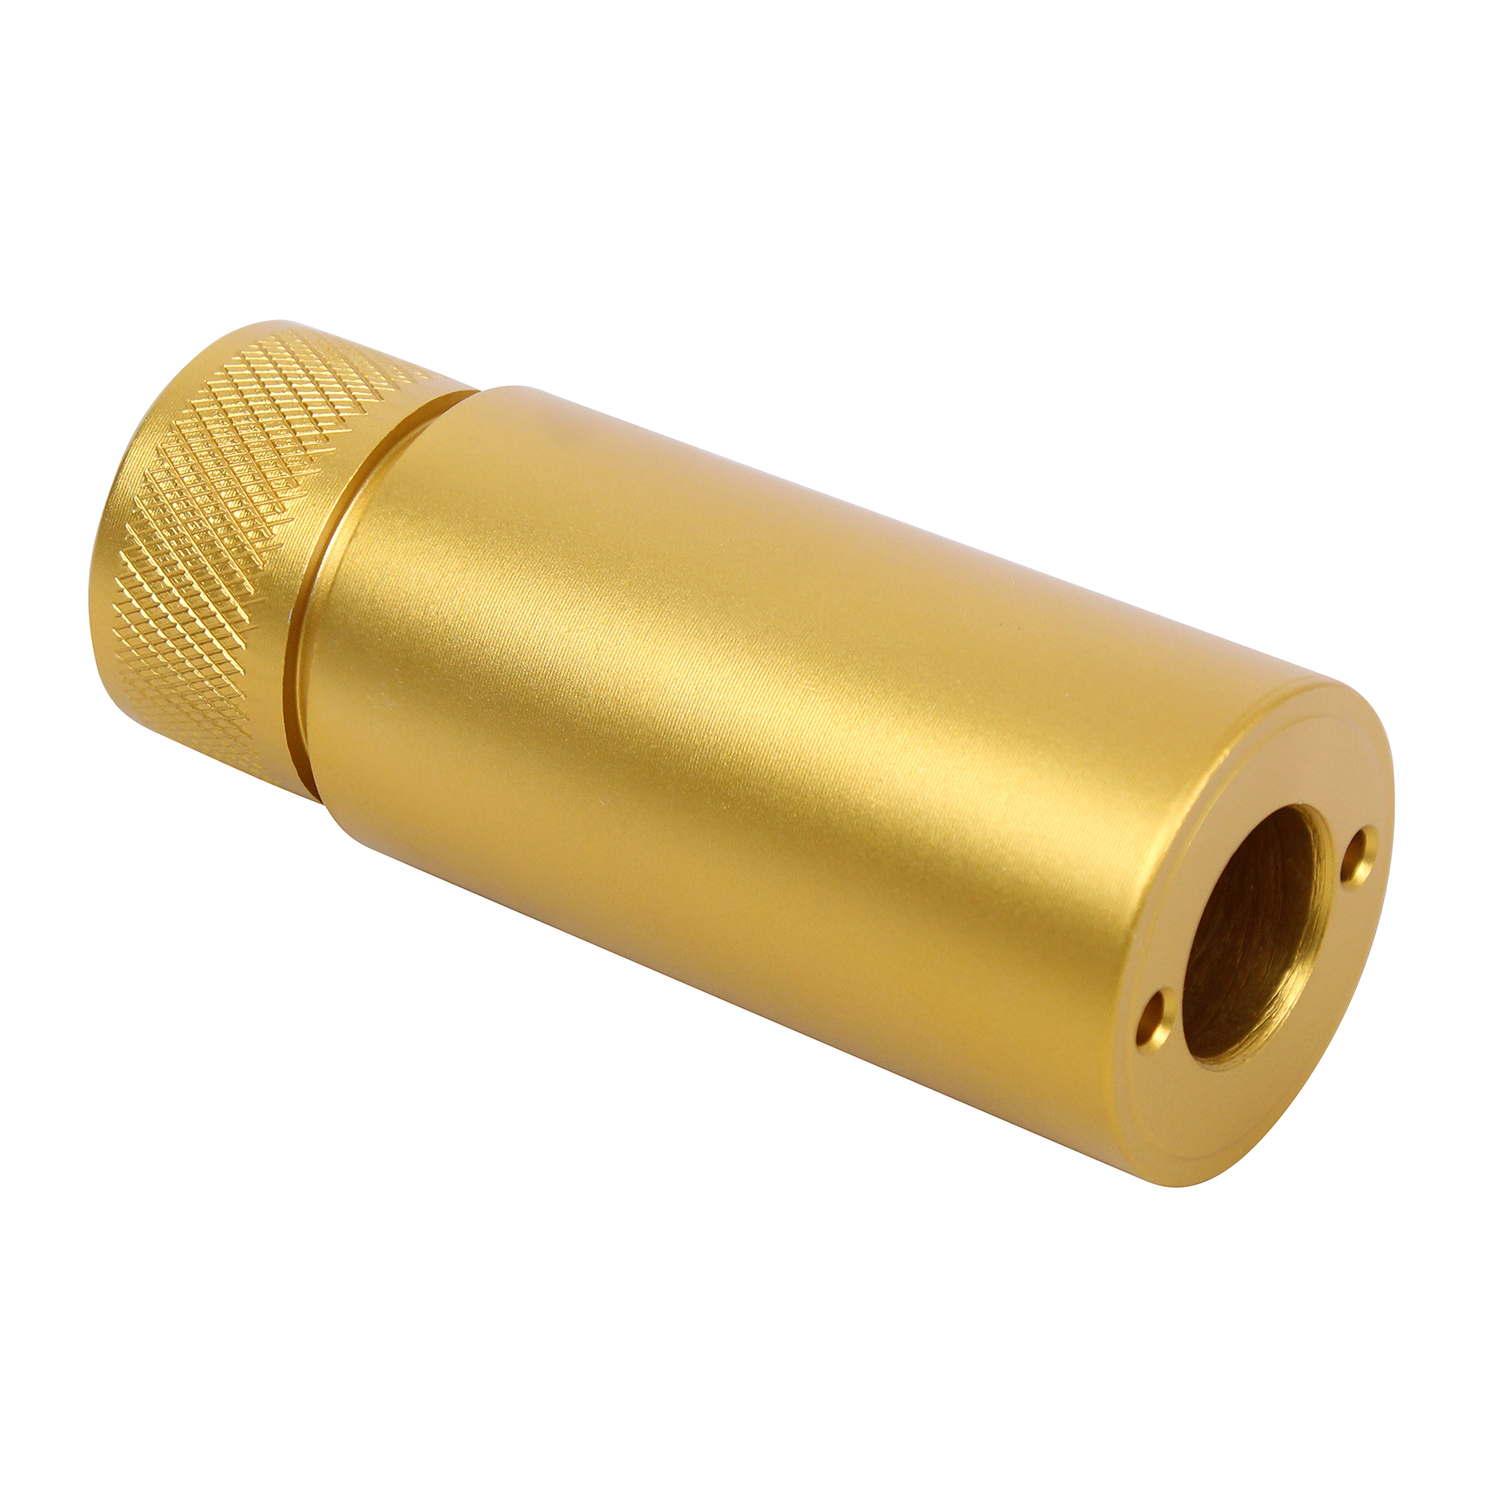 Gold-colored anodized fake suppressor for AR-10 .308 Cal